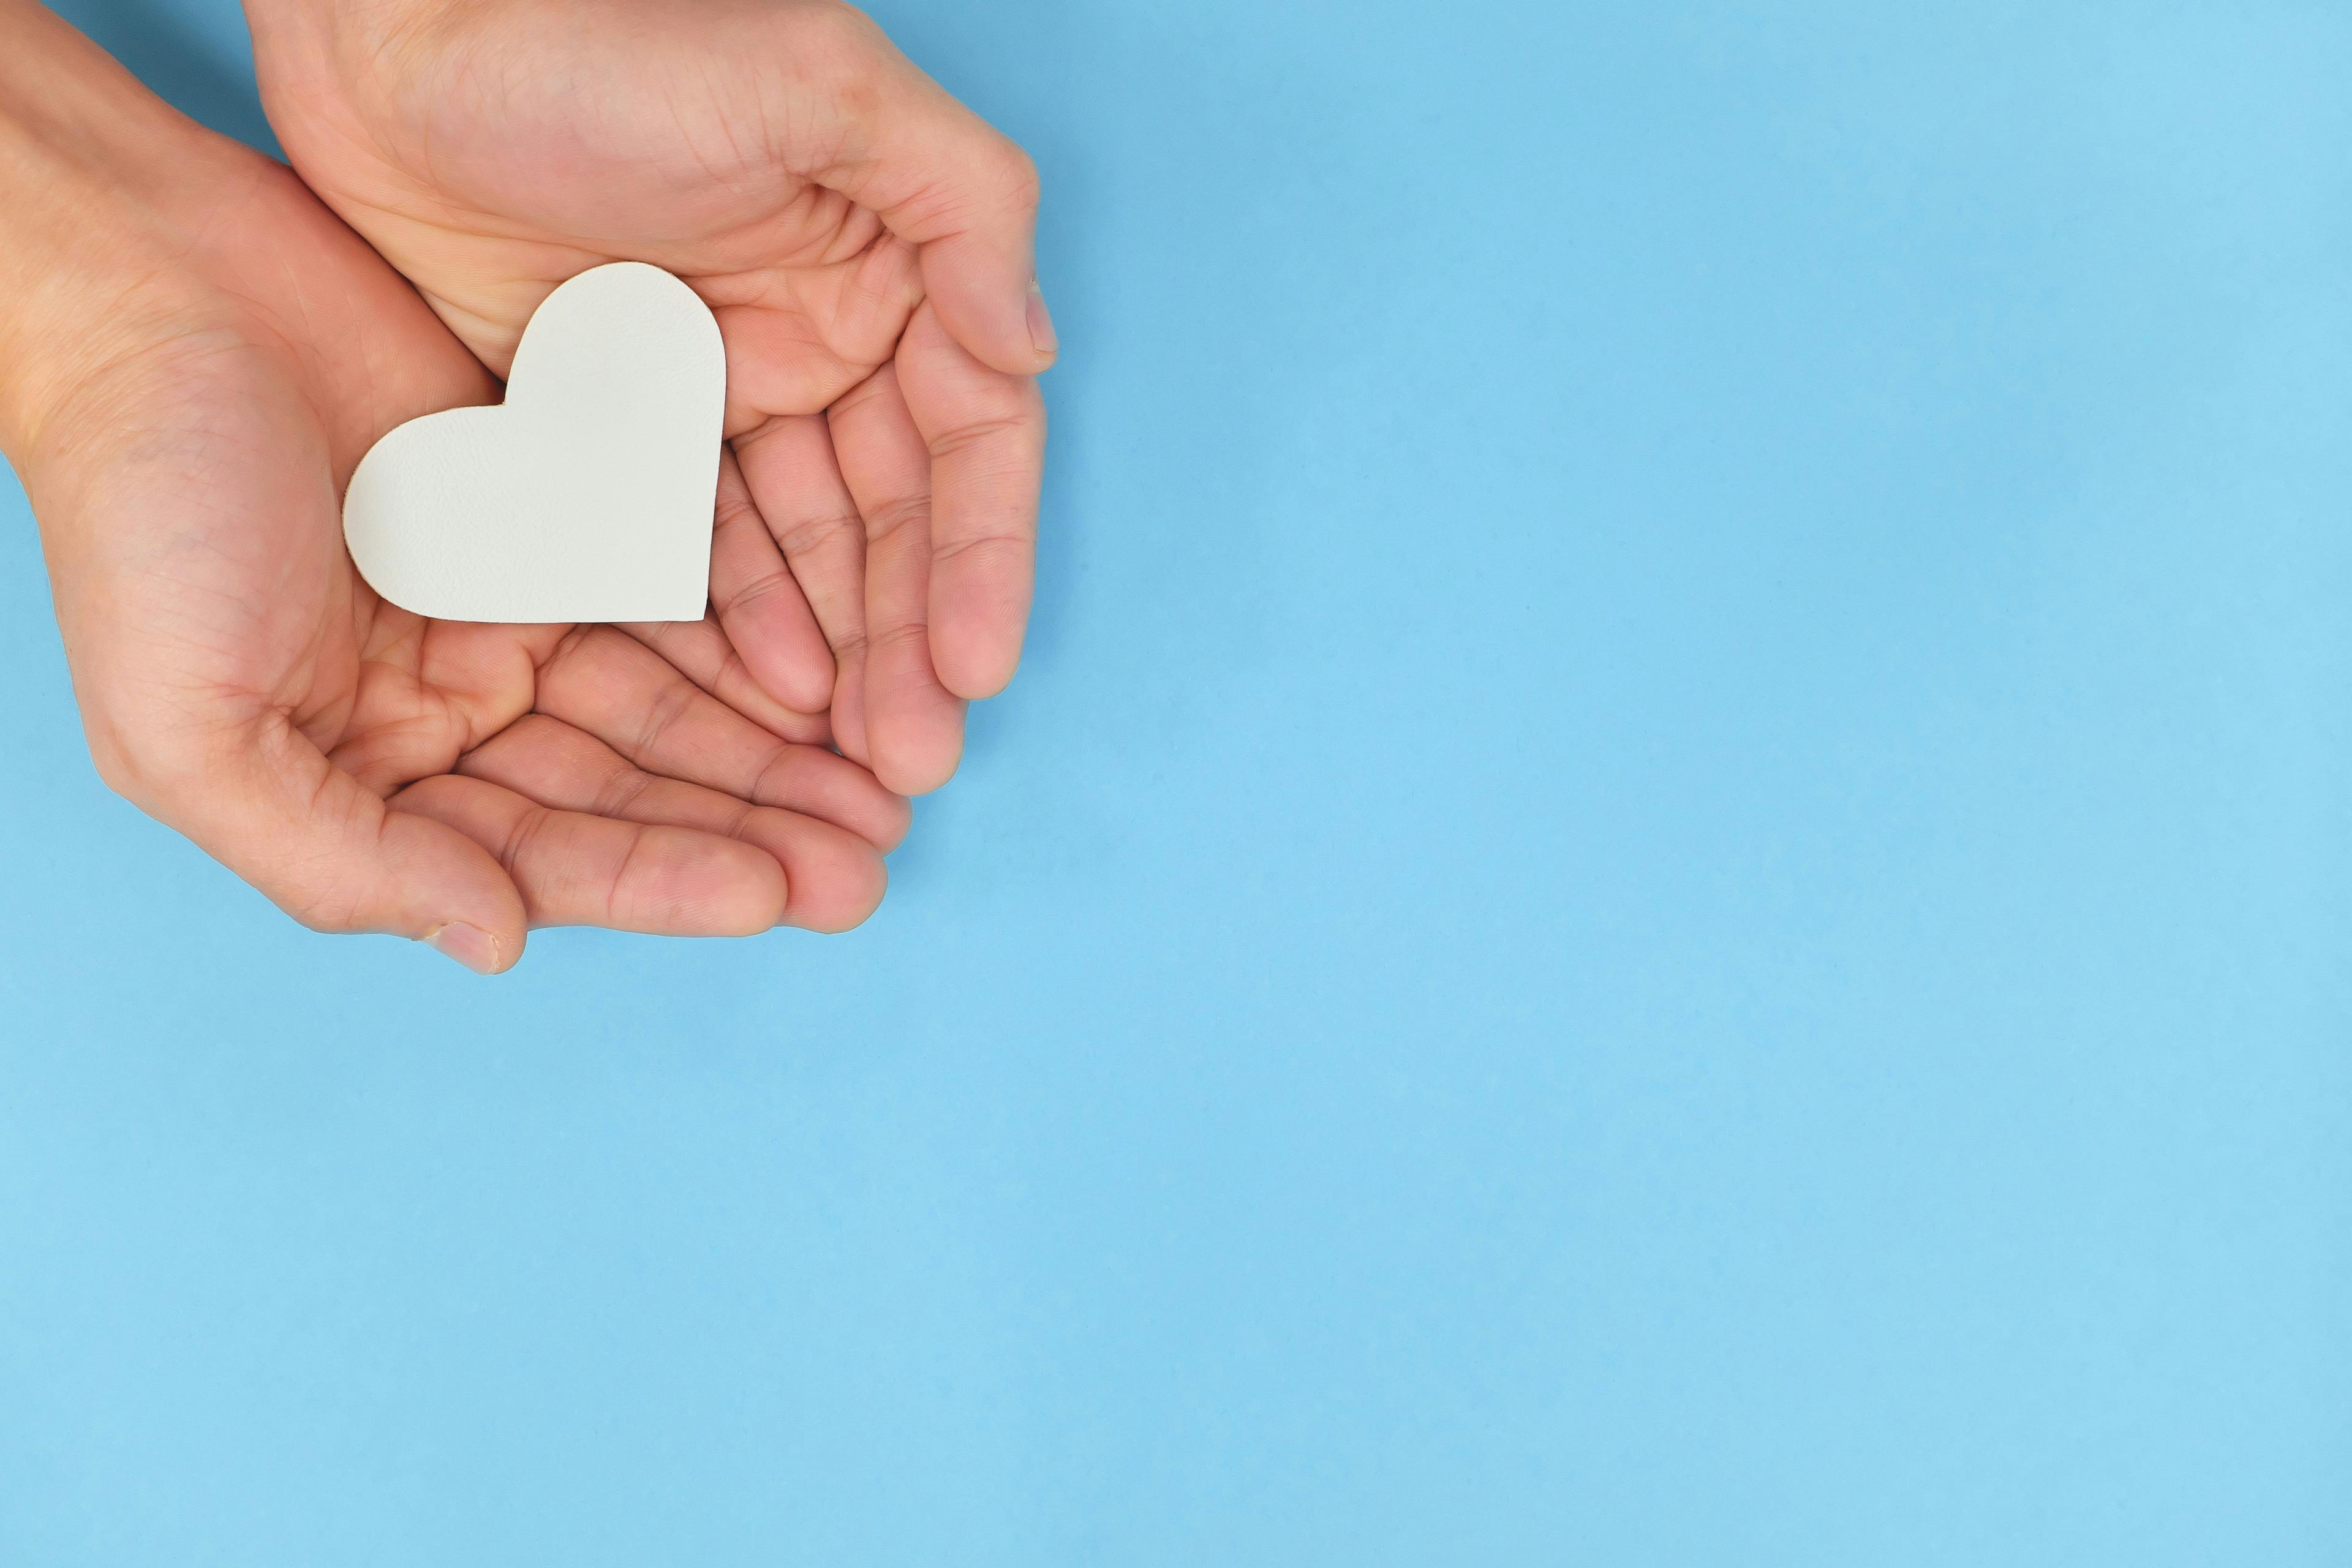 Image of a paper heart cupped in a person's hands.